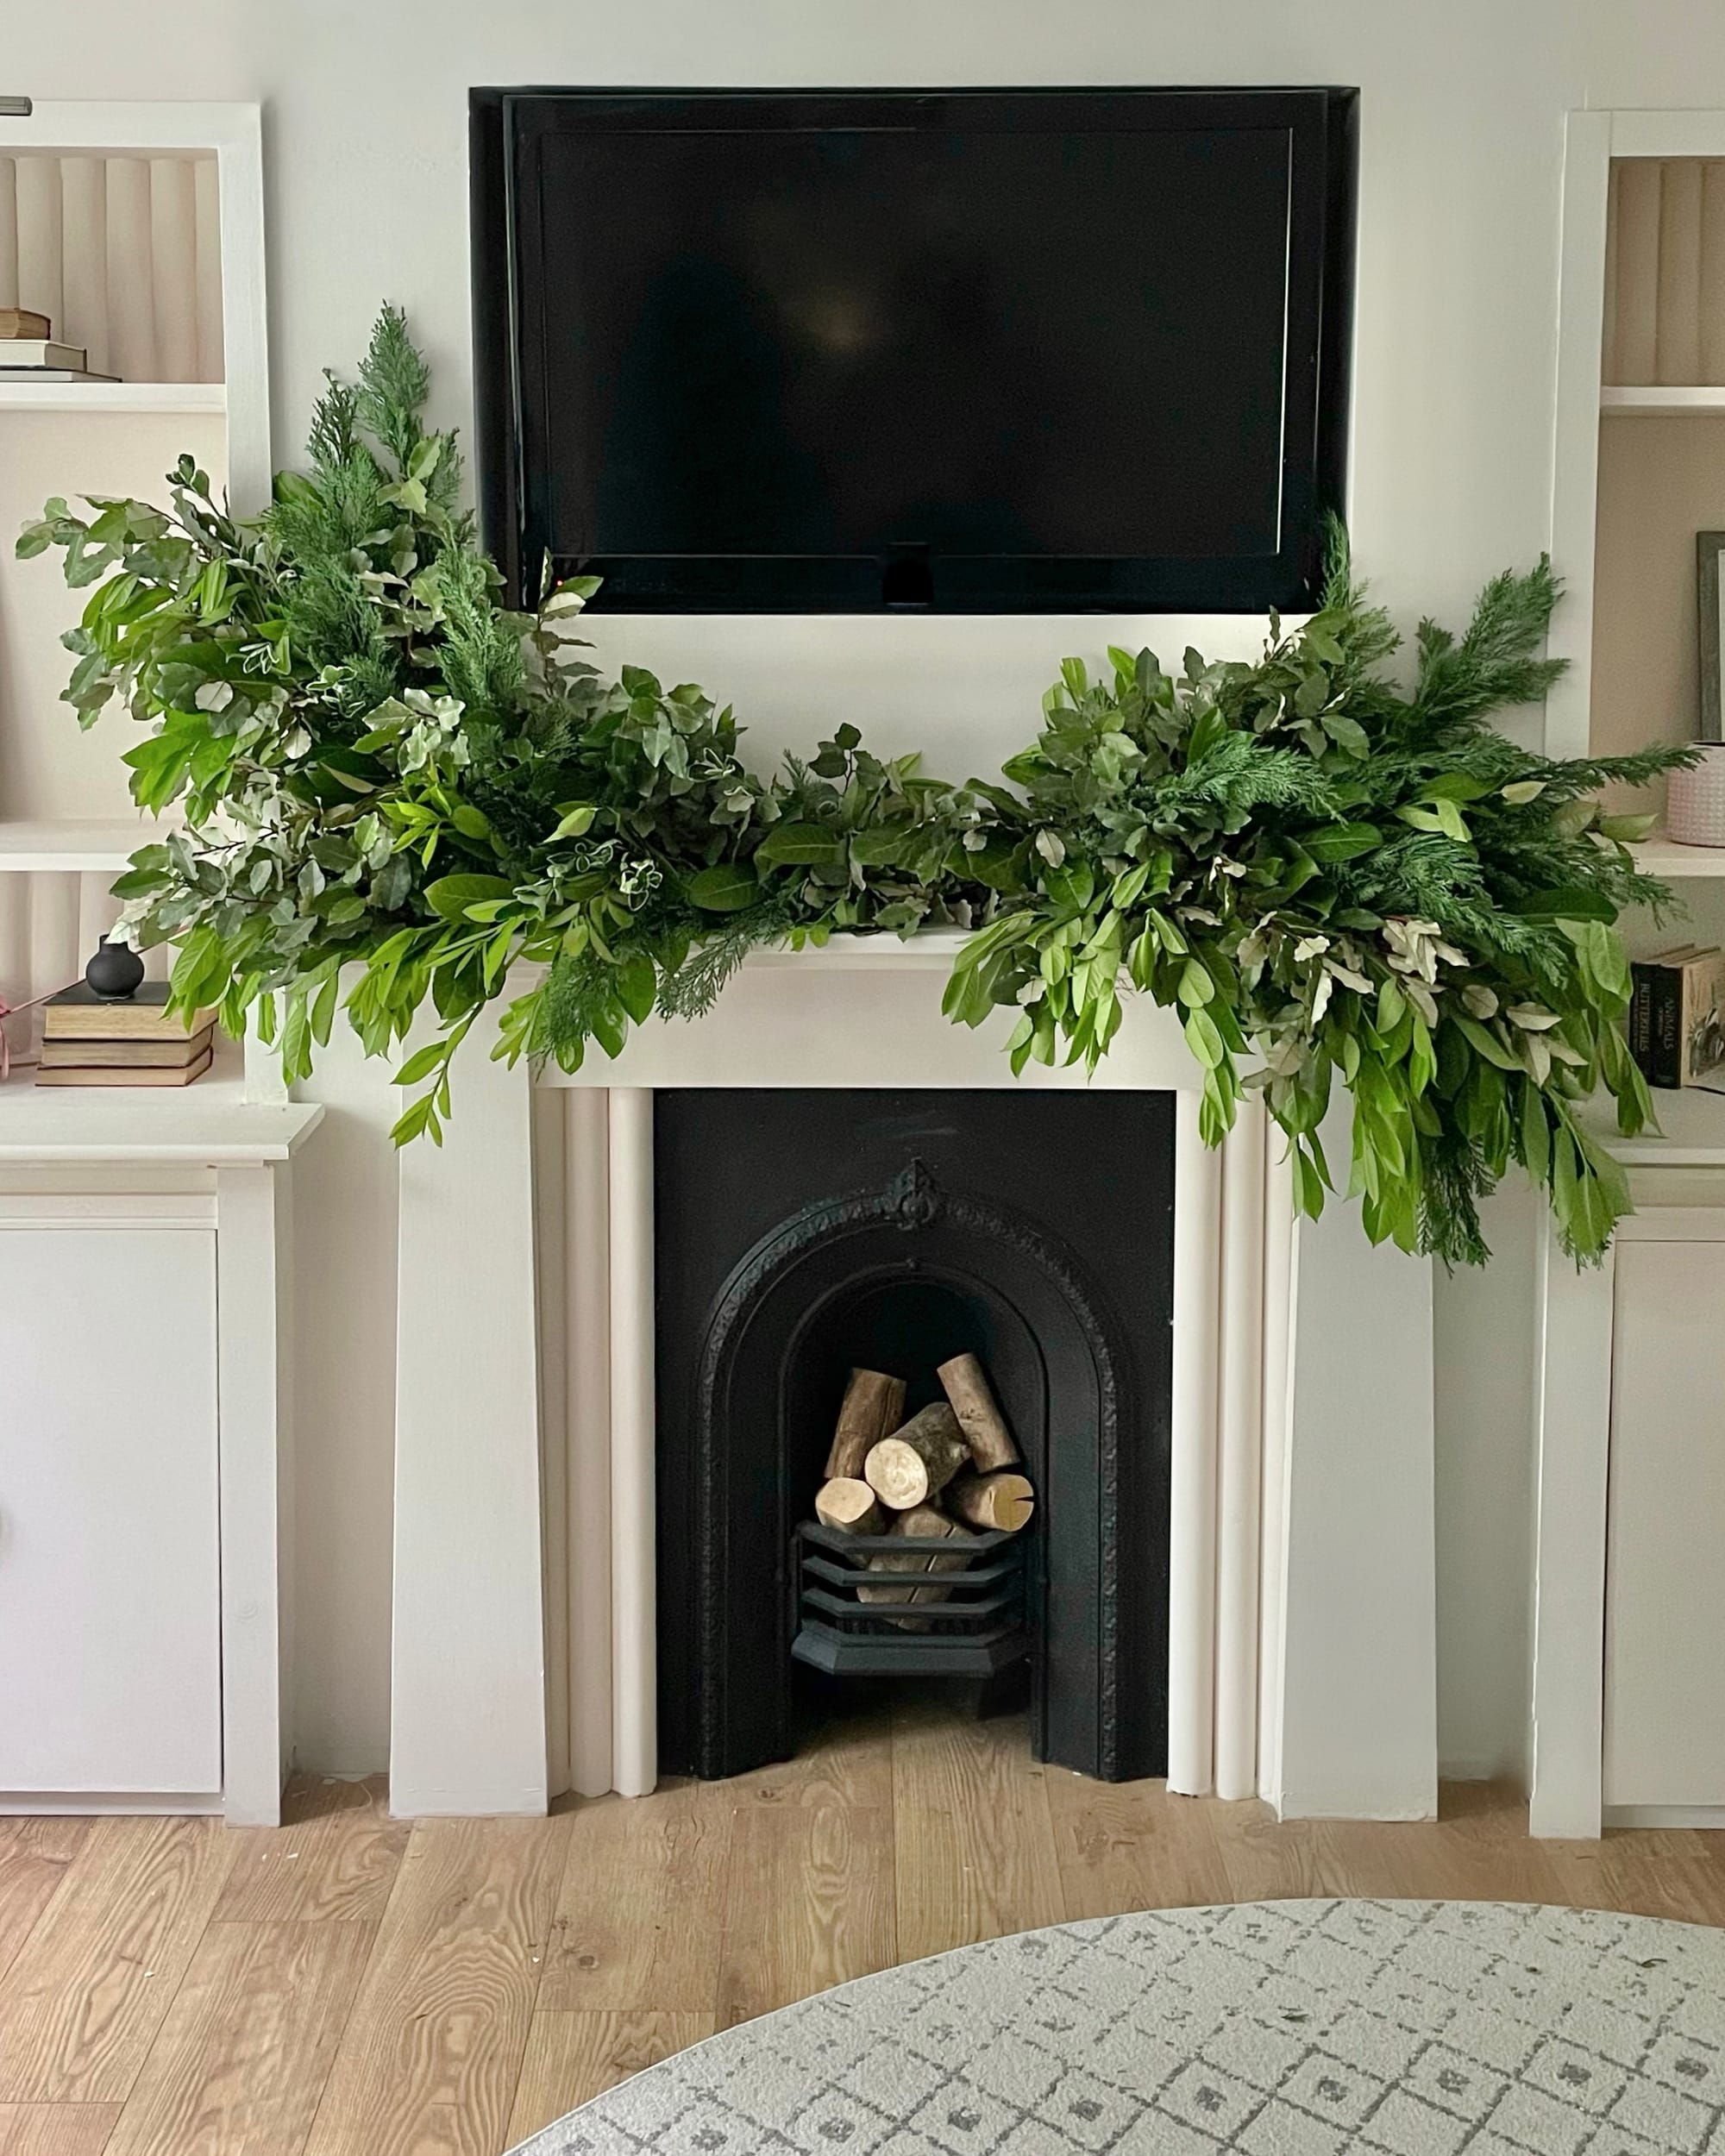 How to repaint a fireplace mantel